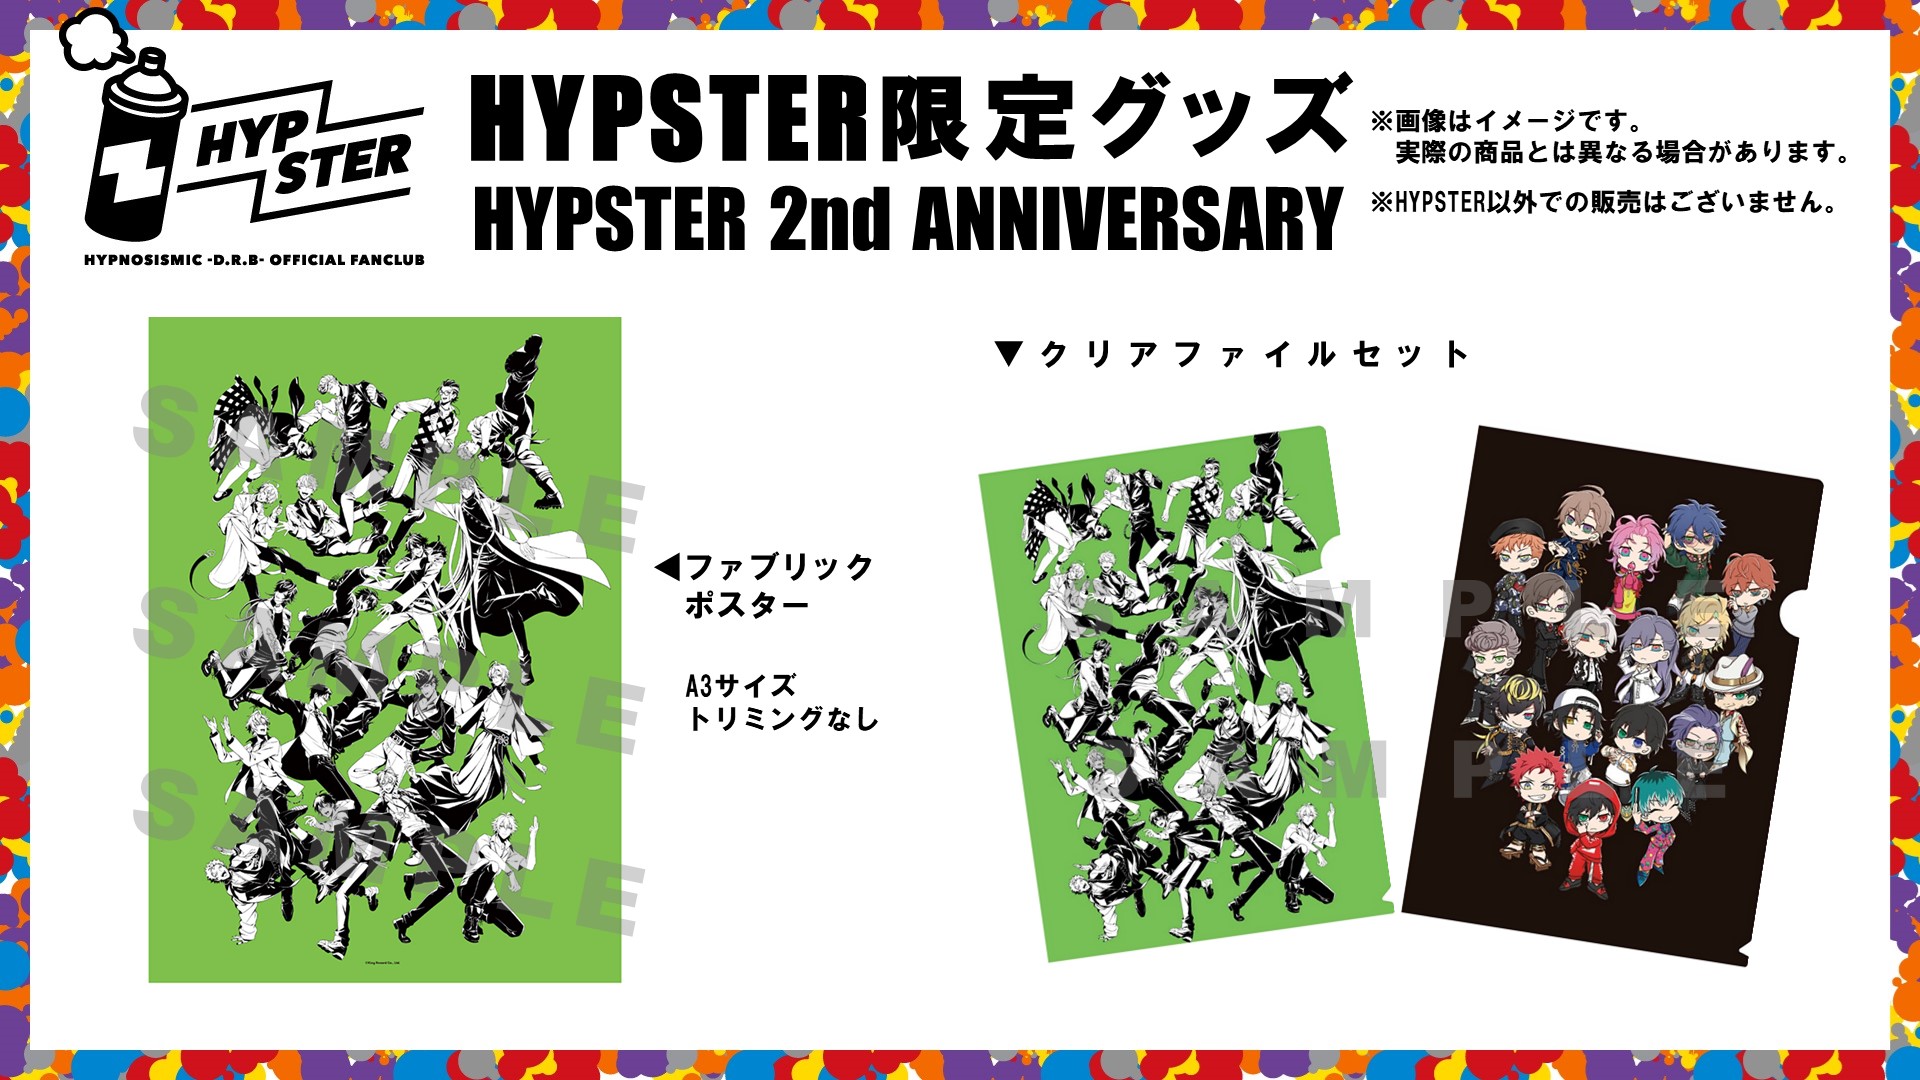 HYPSTER Limited Store販売情報(9月28日更新)｜HYPSTER｜HYPNOSISMIC